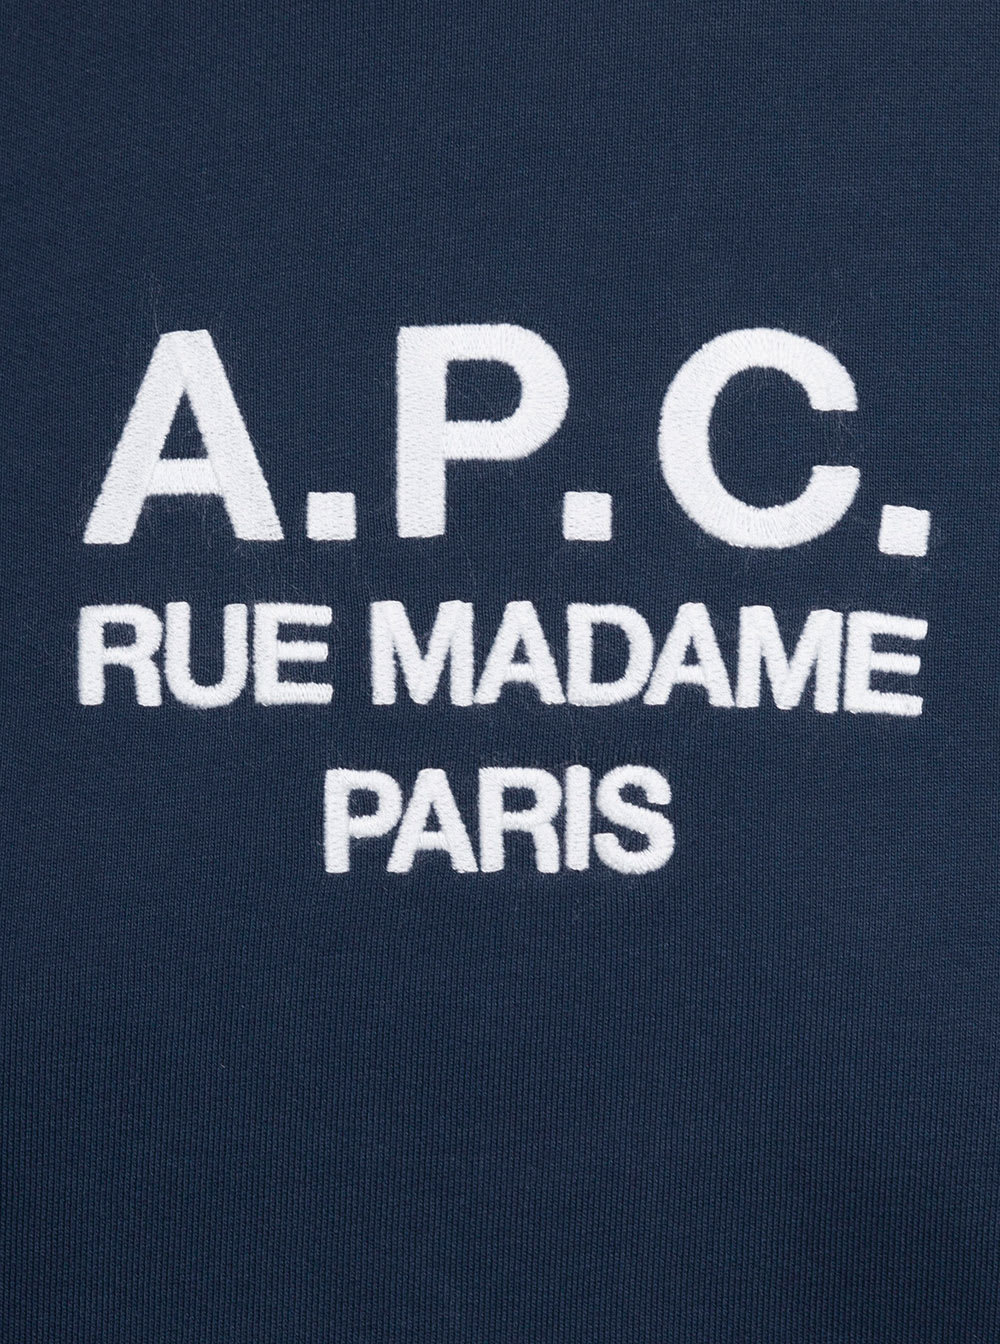 Shop Apc Blue Tina Sweatshirt In Fleece Cotton With Logo Embroidery To The Chest A.p.c. Woman